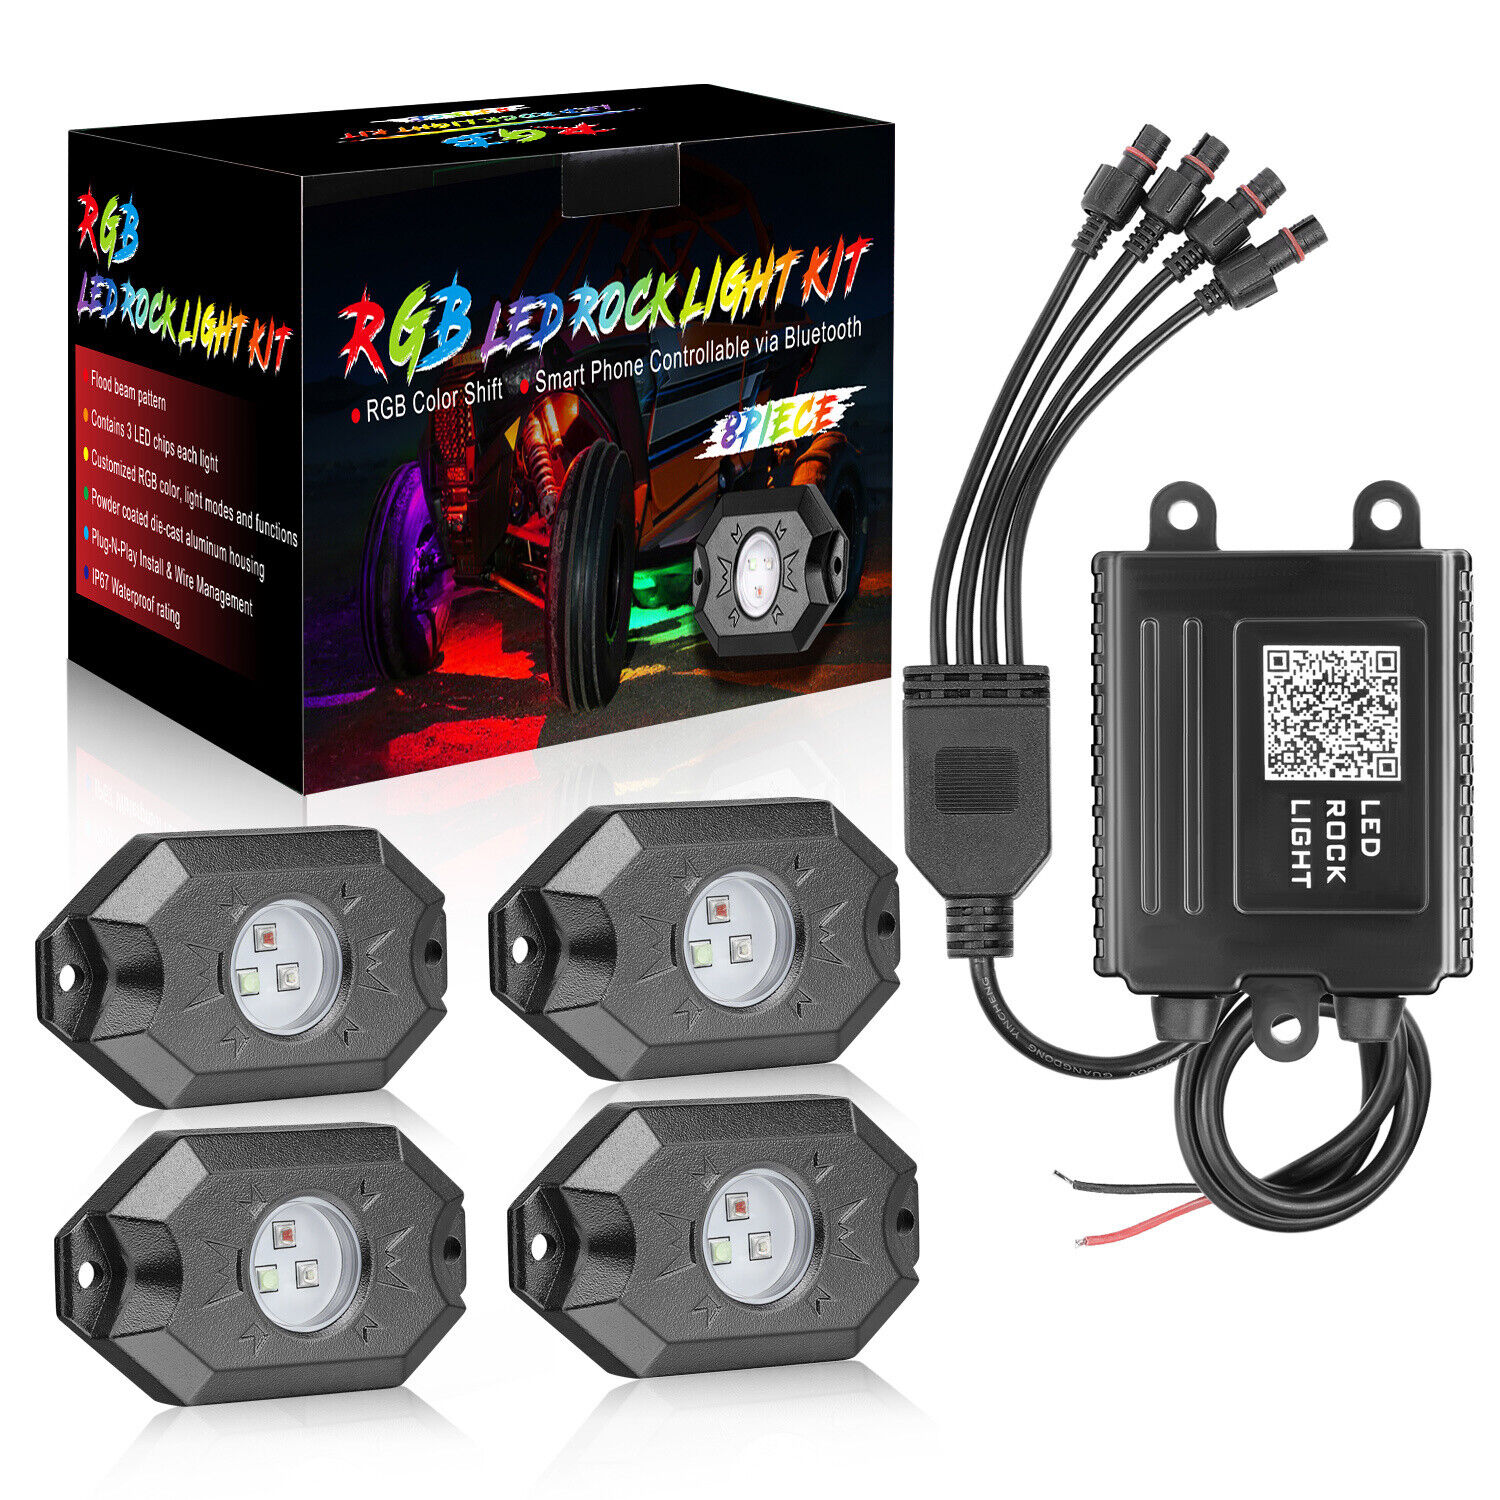 RGB LED Rock Lights Kit Offroad Truck Underbody Neon Pods Motorcycle Boat Truck